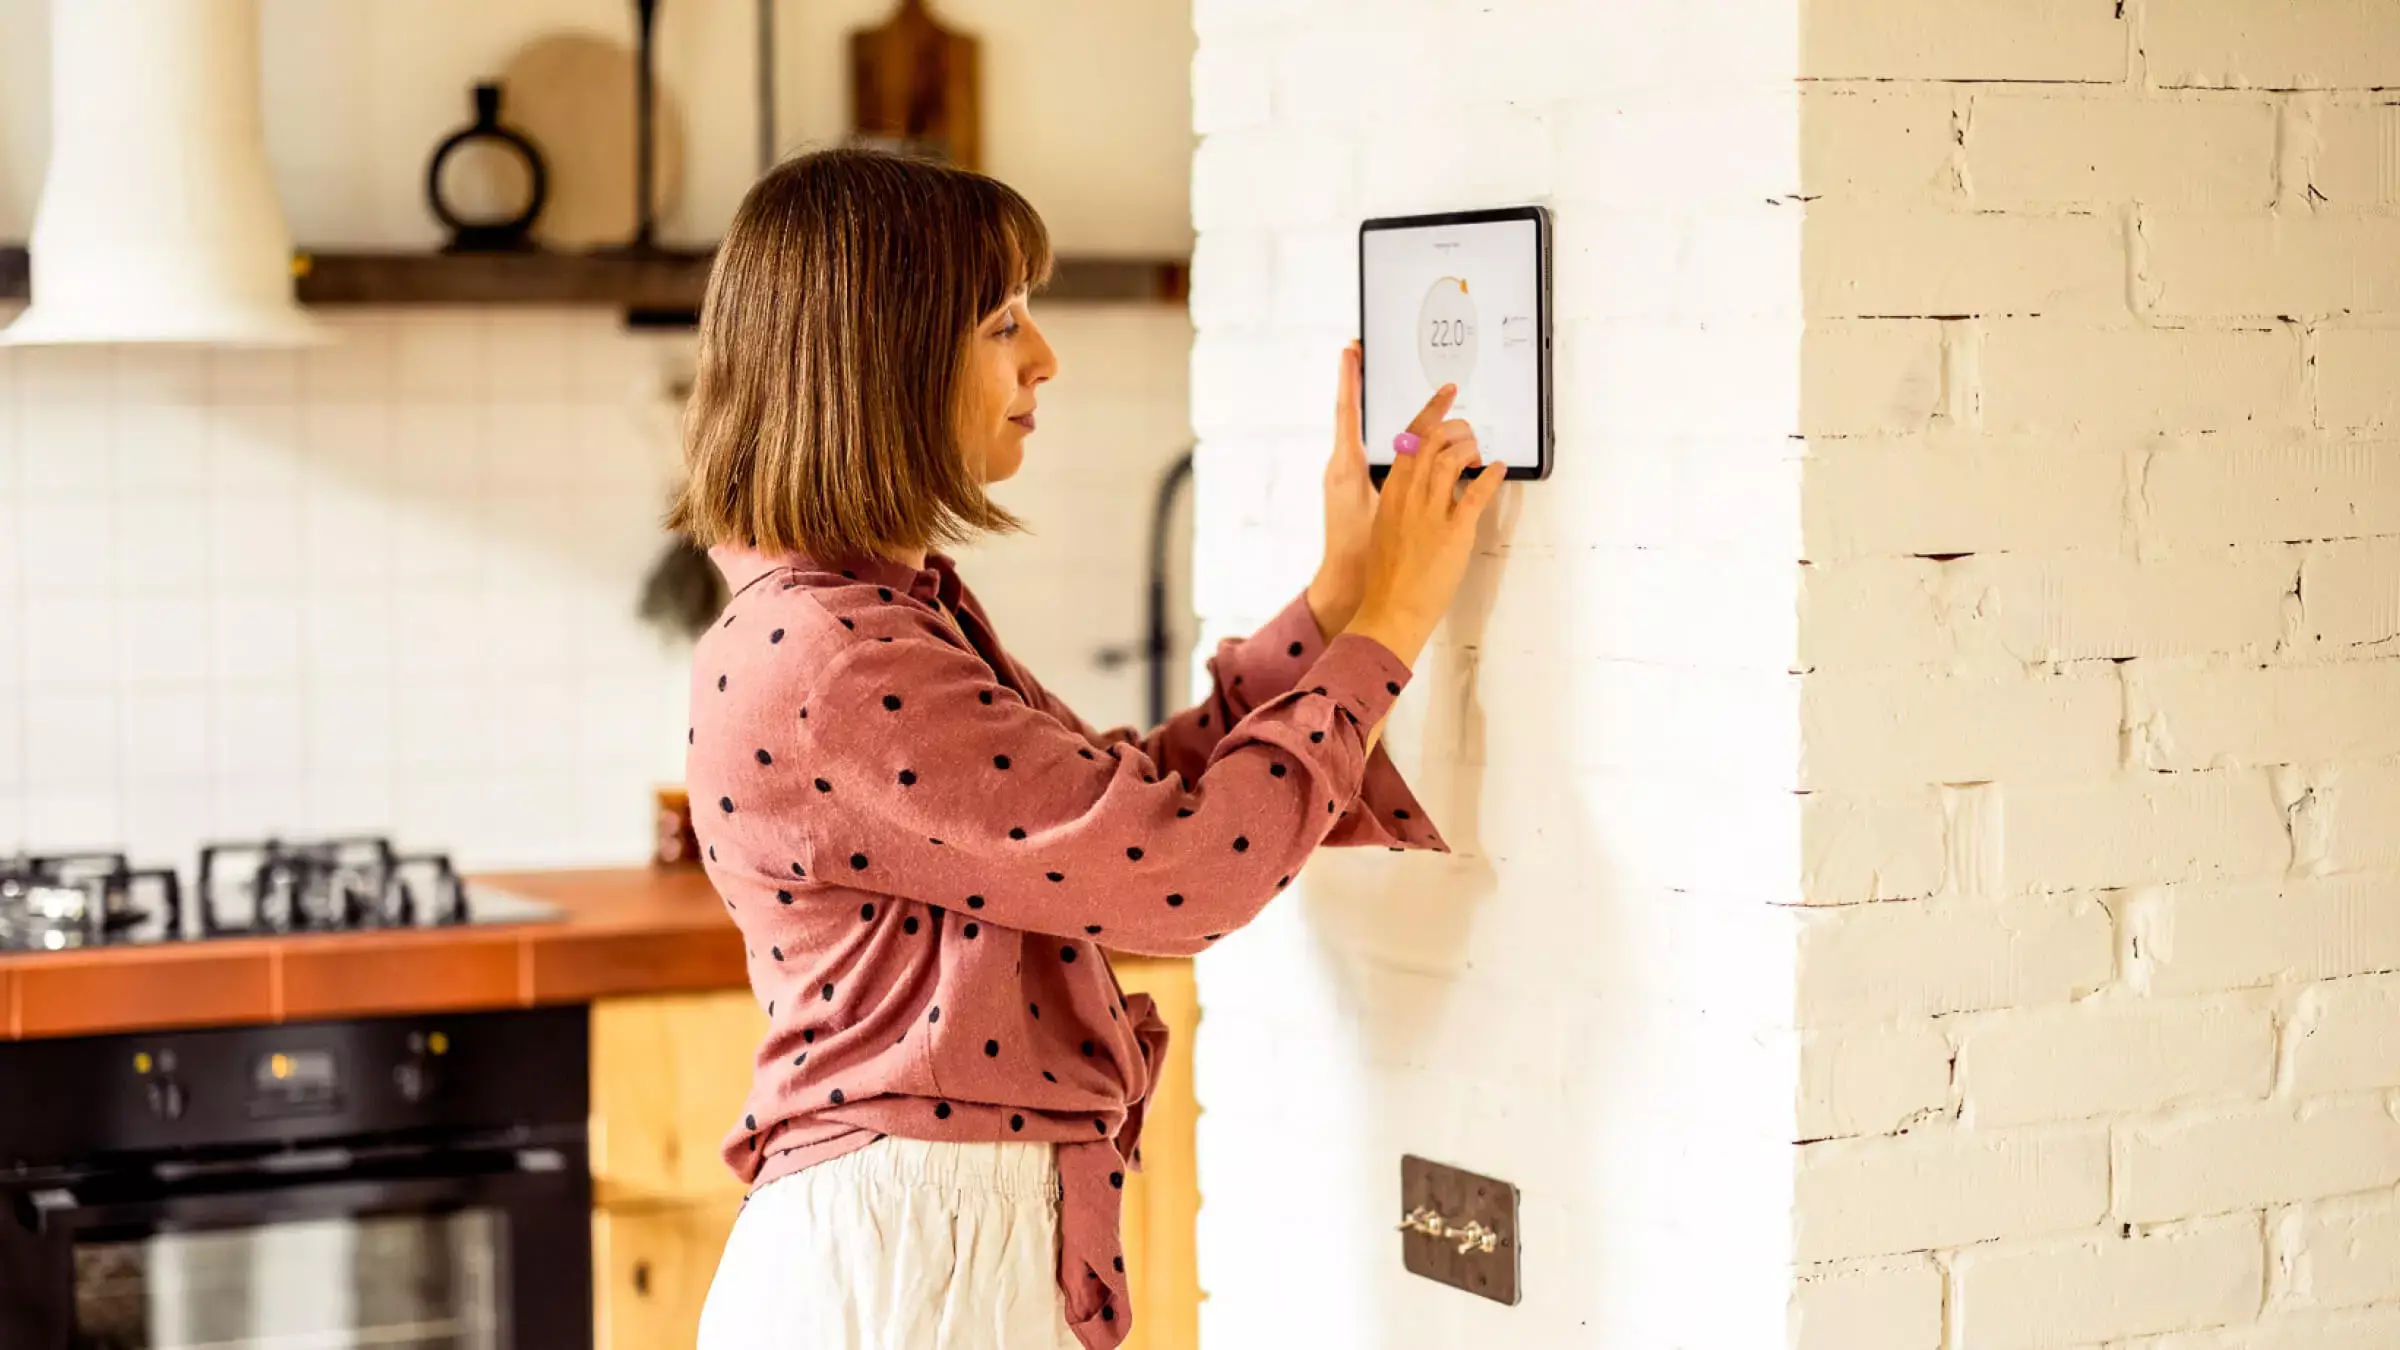 Managing home using a smart device